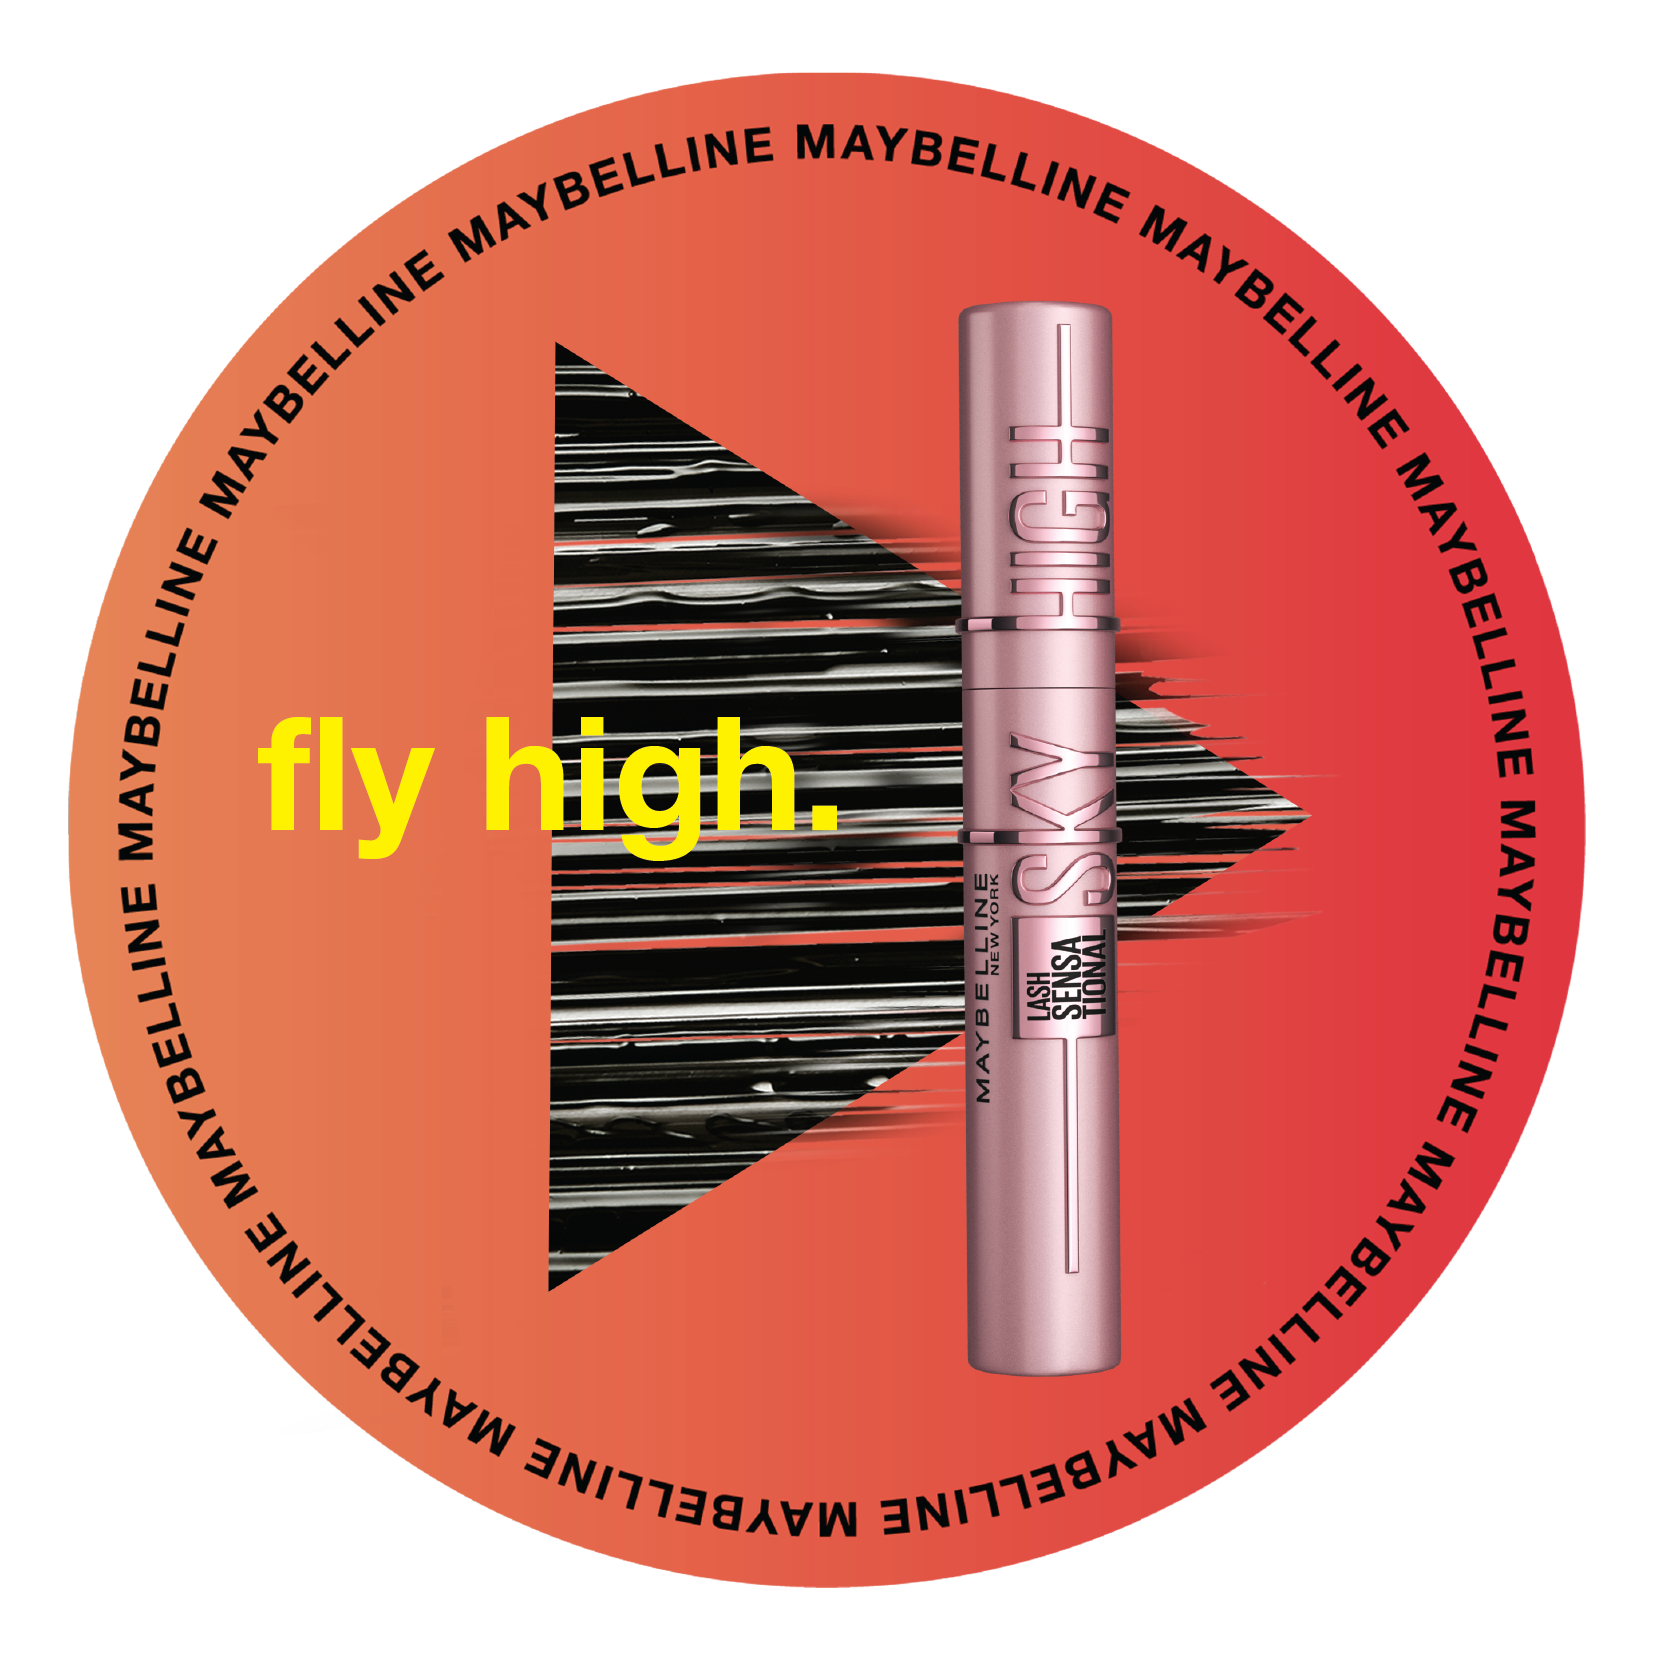 MAYBELLINE NEW YORK BRINGS COLOR TO LIFE WITH ITS MAKEUP PRODUCTS